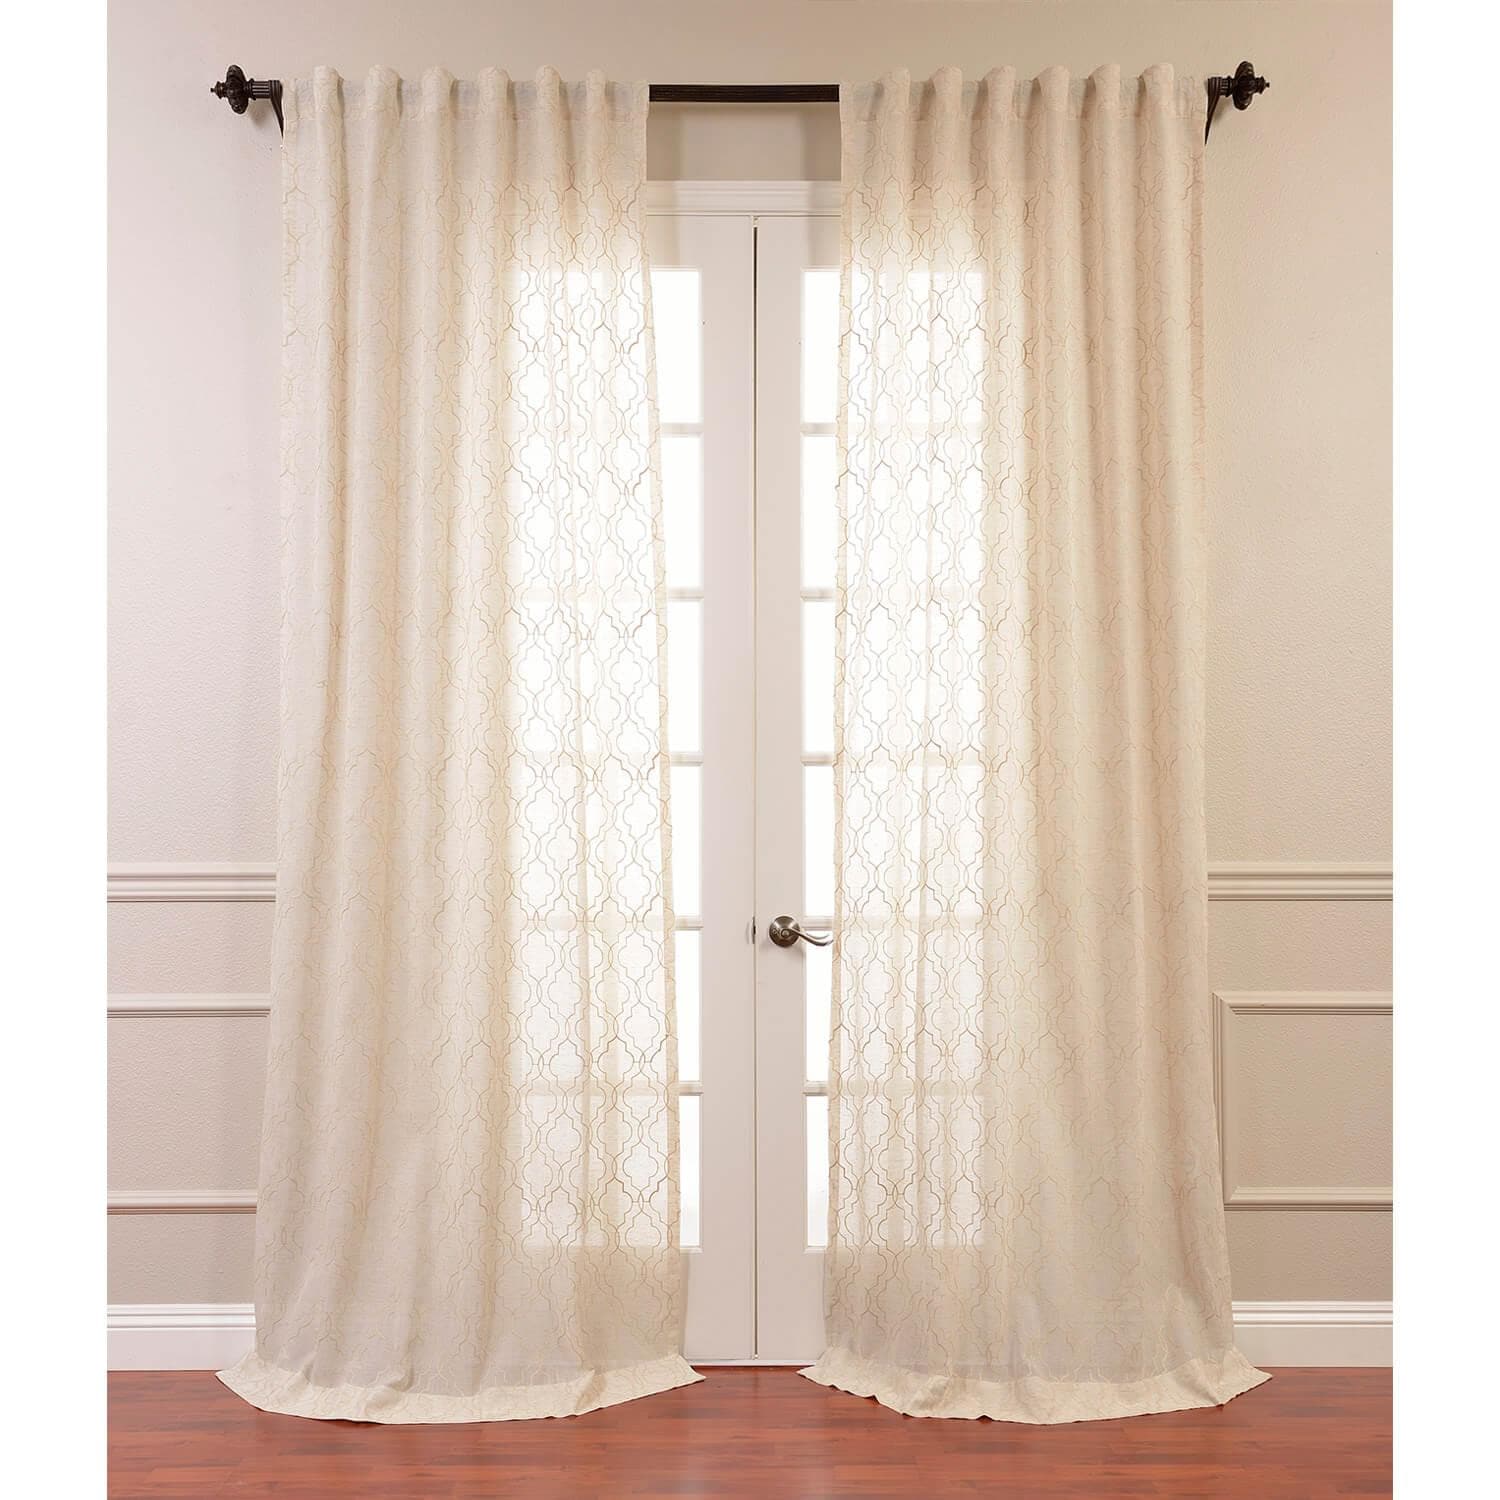 Saida Natural Embroidered Patterned Faux Linen Sheer Curtain